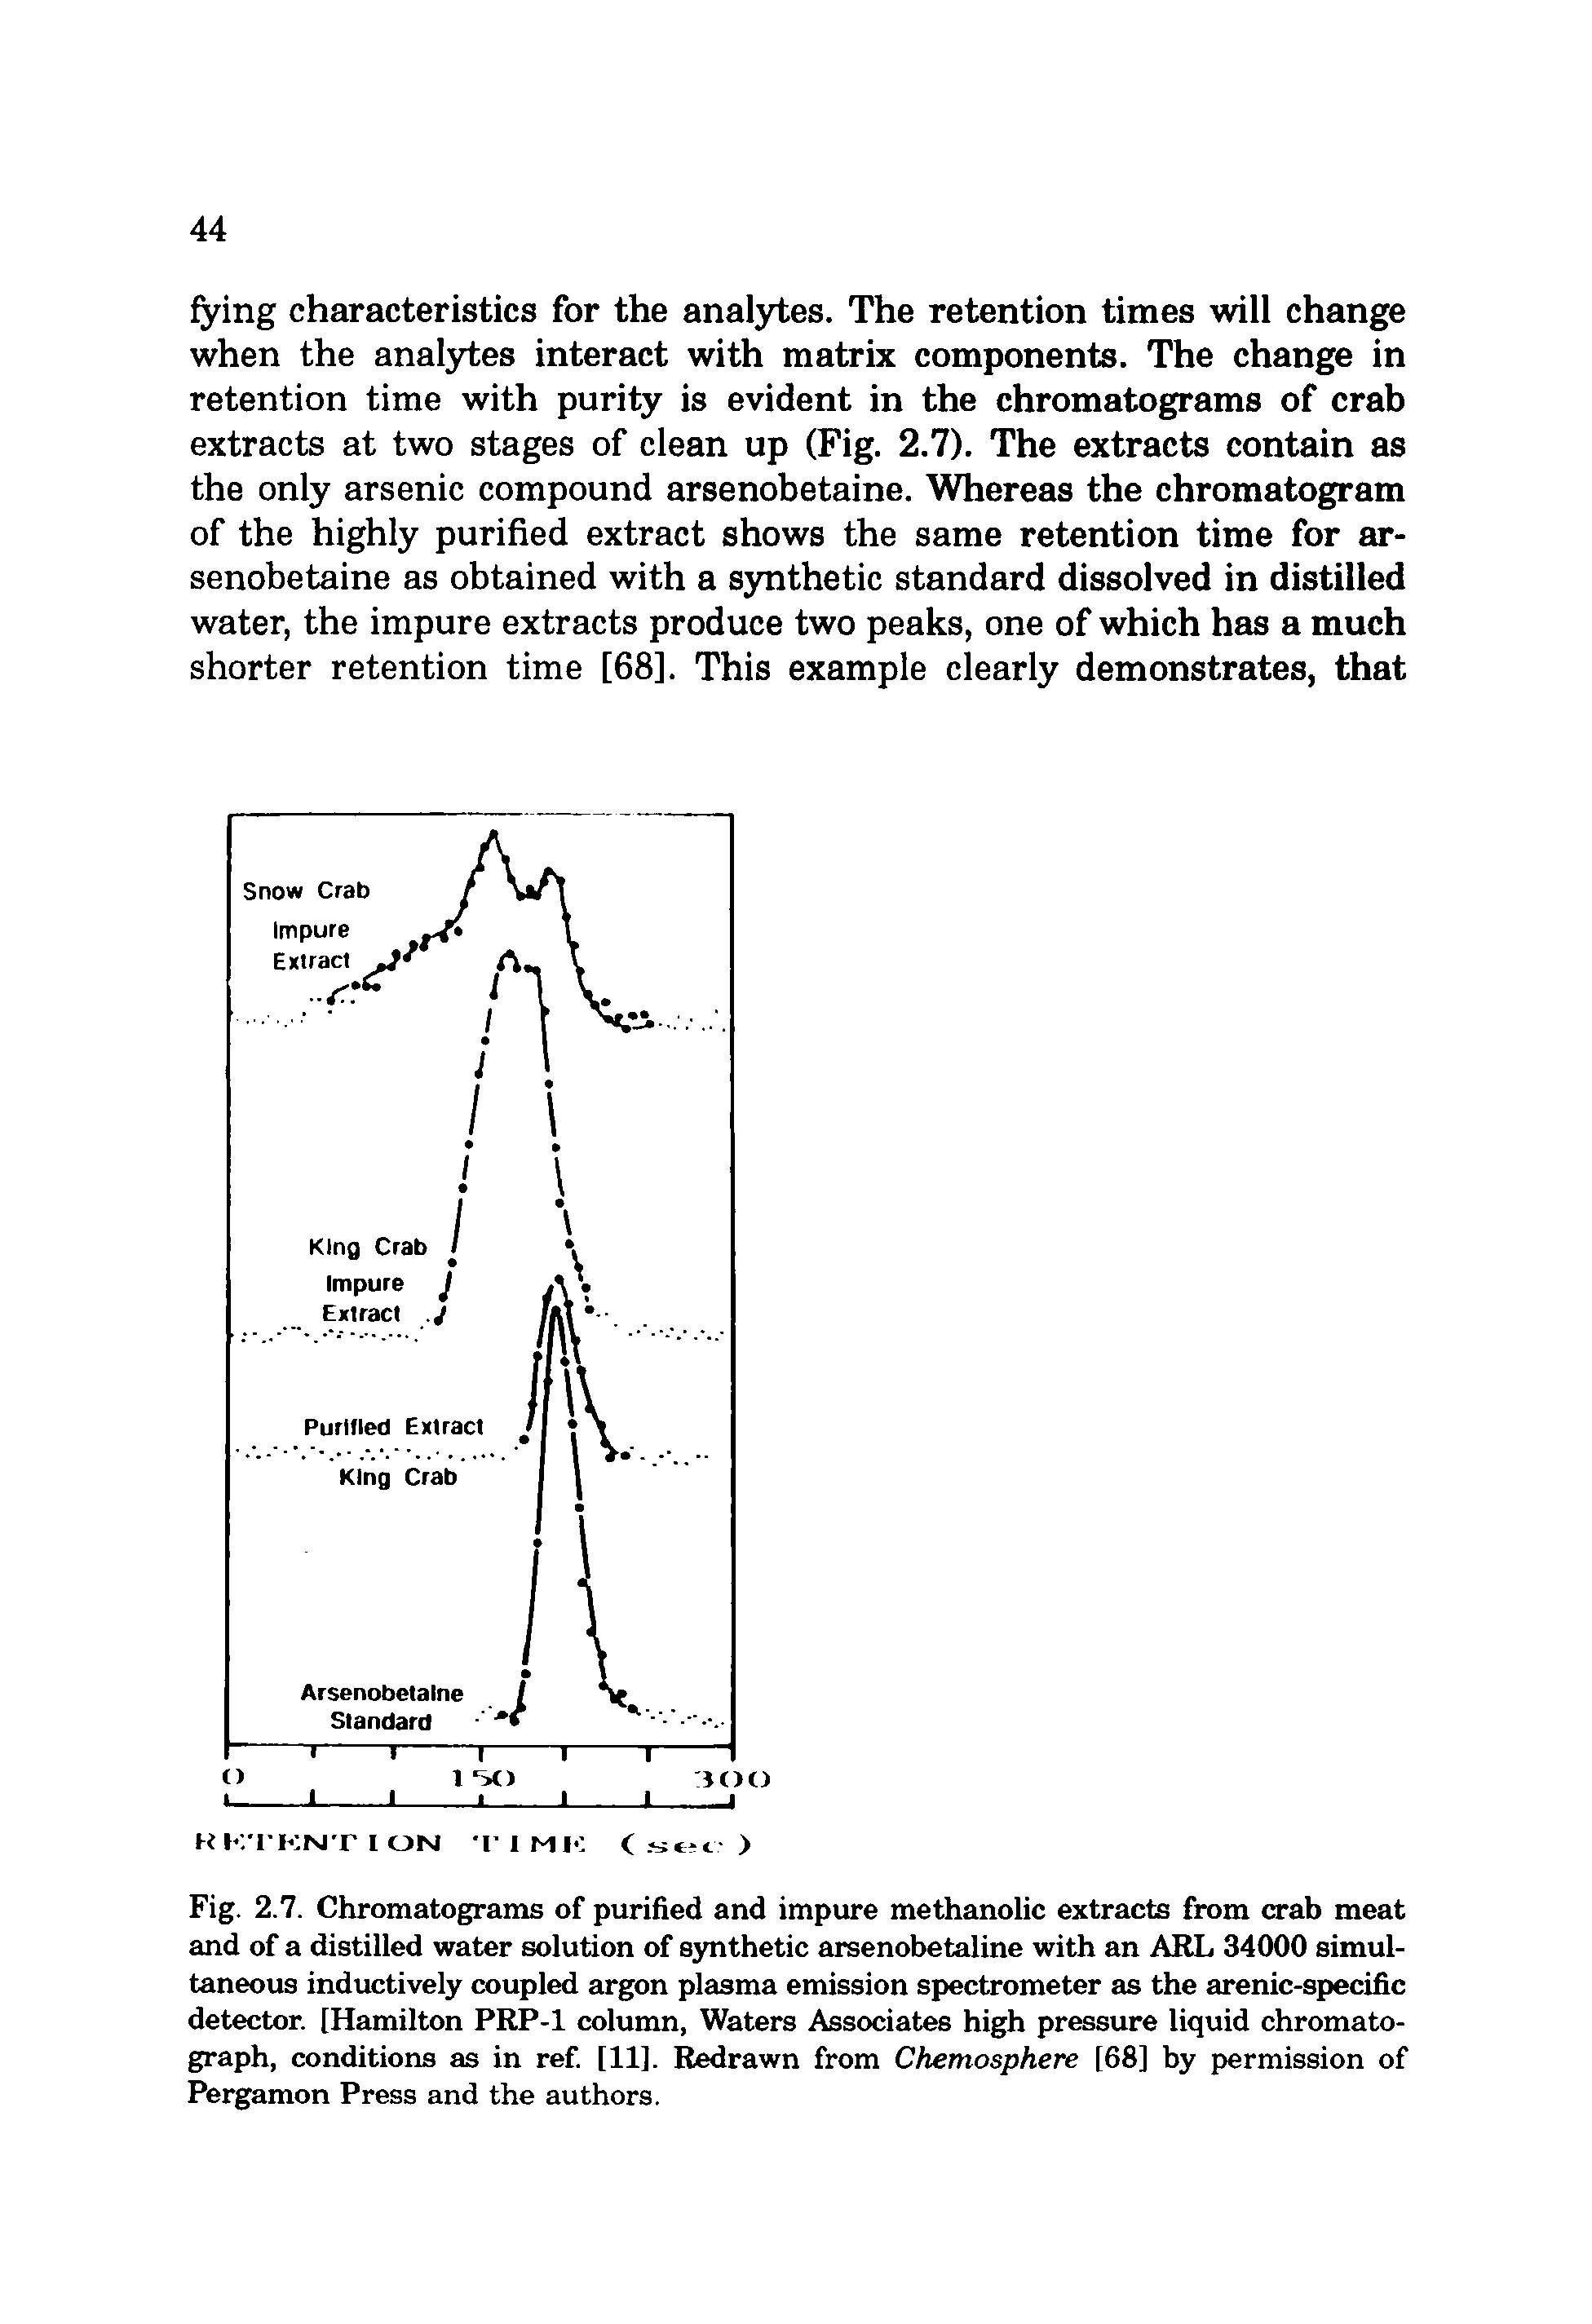 Fig. 2.7. Chromatograms of purified and impure methanolic extracts from crab meat and of a distilled water solution of S3mthetic arsenobetaline with an ARL 34000 simultaneous inductively coupled argon plasma emission spectrometer as the arenic-specific detector. [Hamilton PRP-1 column, Waters Associates high pressure liquid chromatograph, conditions as in ref [11], Redrawn from Chemoaphere [68] by permission of Pergamon Press and the authors.